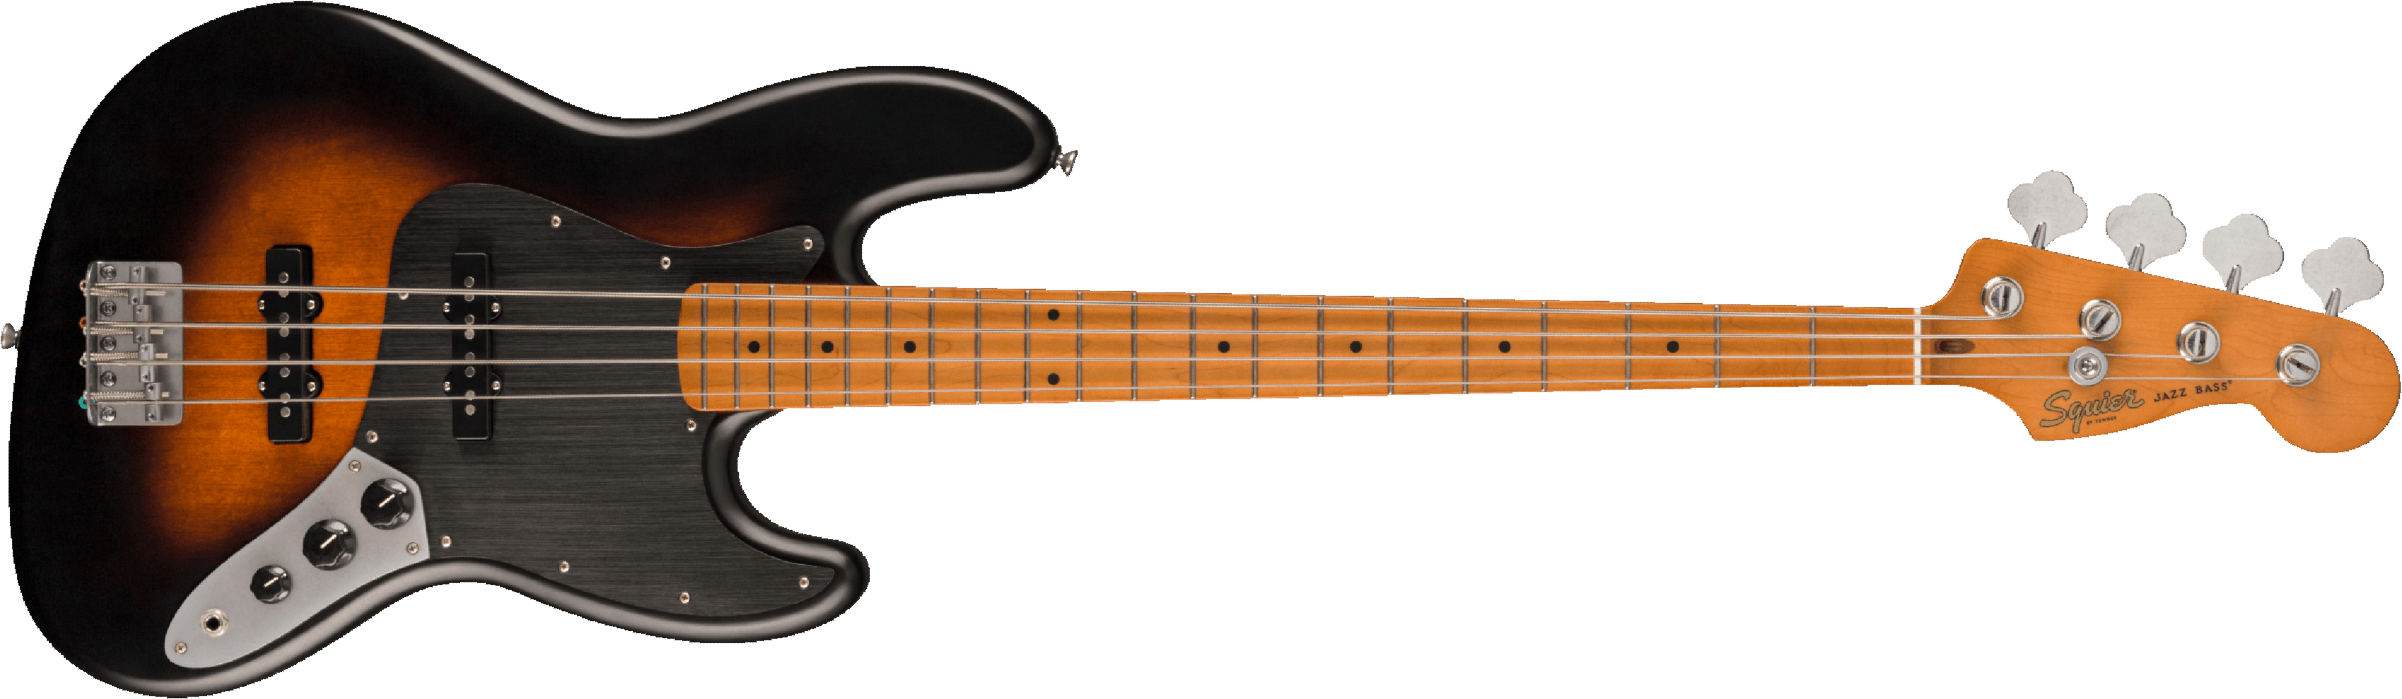 Squier Jazz Bass 40th Anniversary Gold Edition Mn - Satin Wide 2-color Sunburst - Solid body electric bass - Main picture